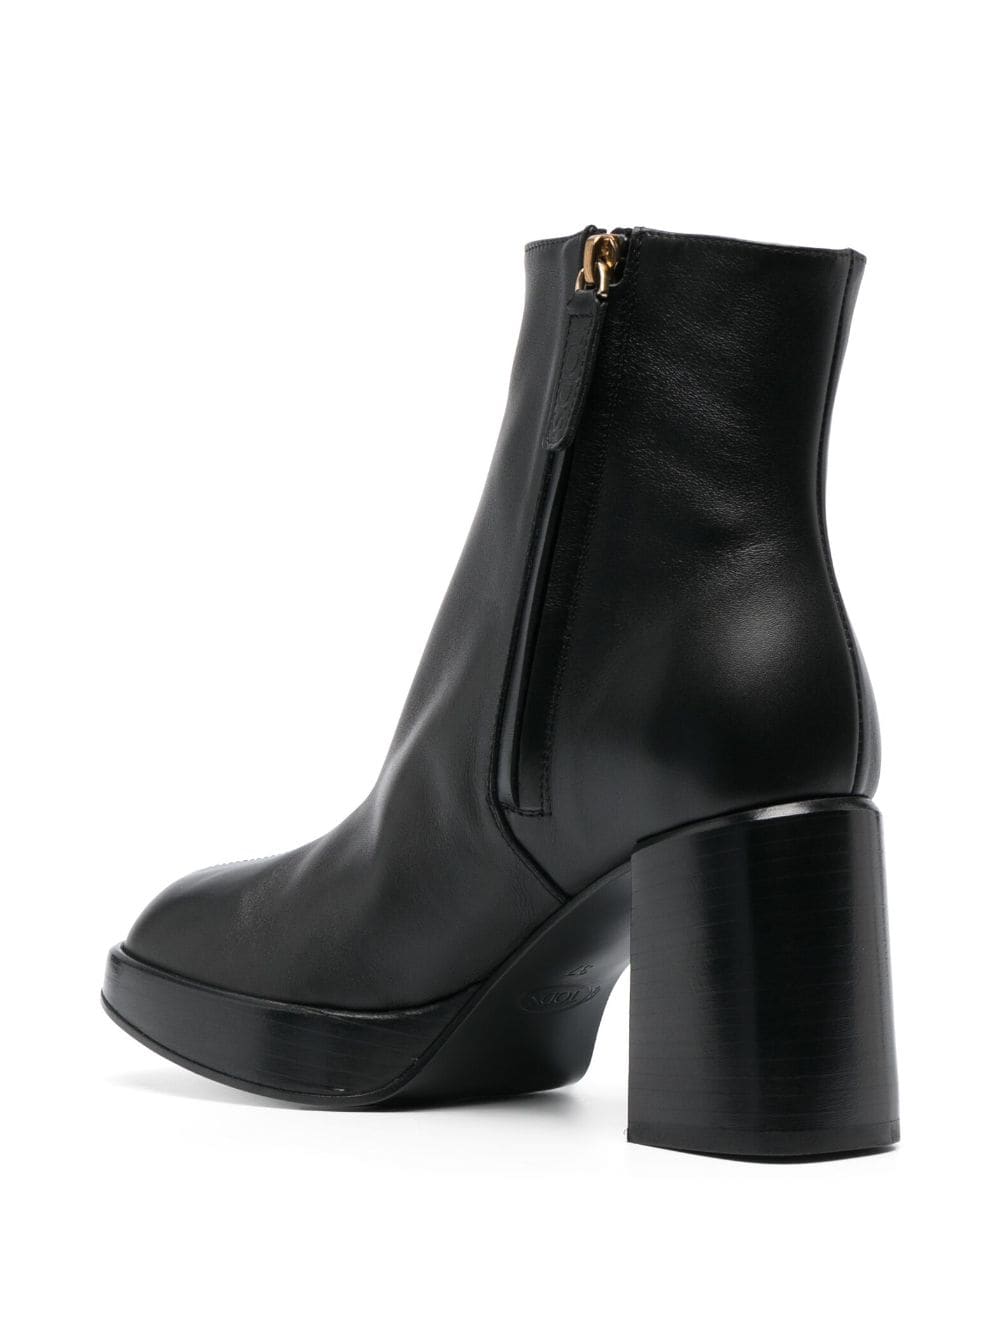 Statement-Making Square-Toe Leather Boots for Women - FW23